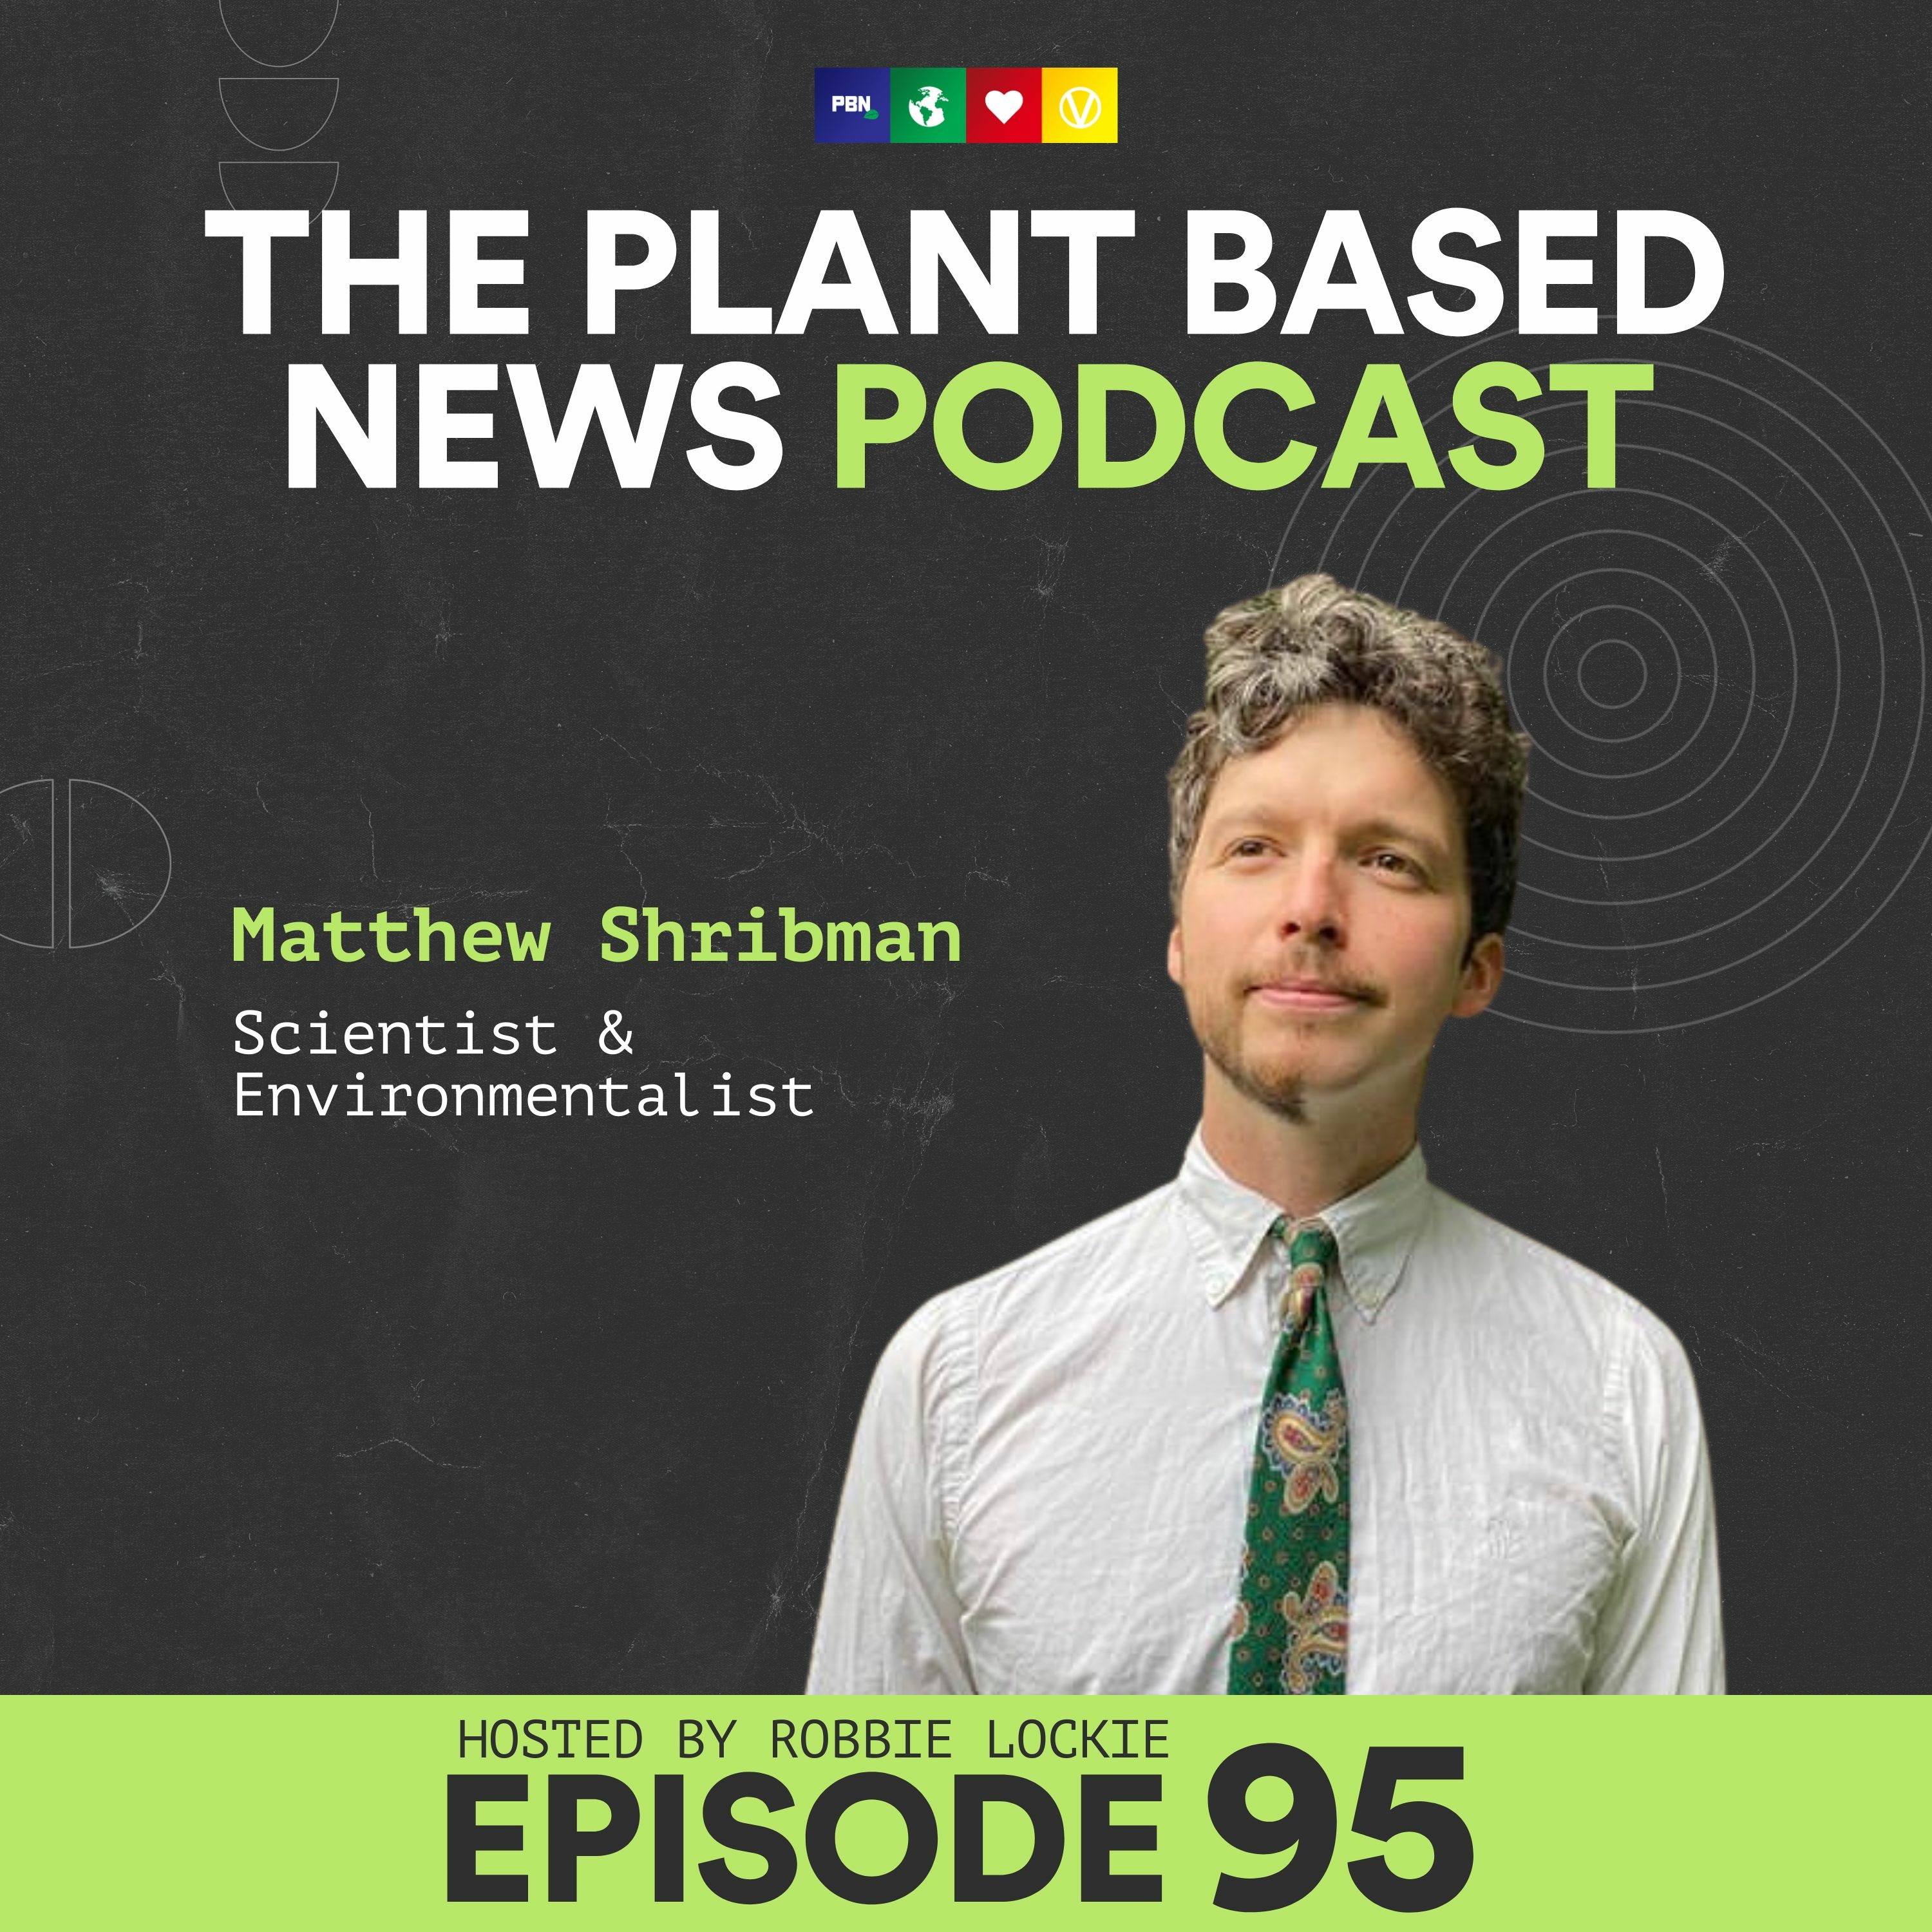 How To Cope With Eco Anxiety With Scientist & Environmentalist Matthew Shribman